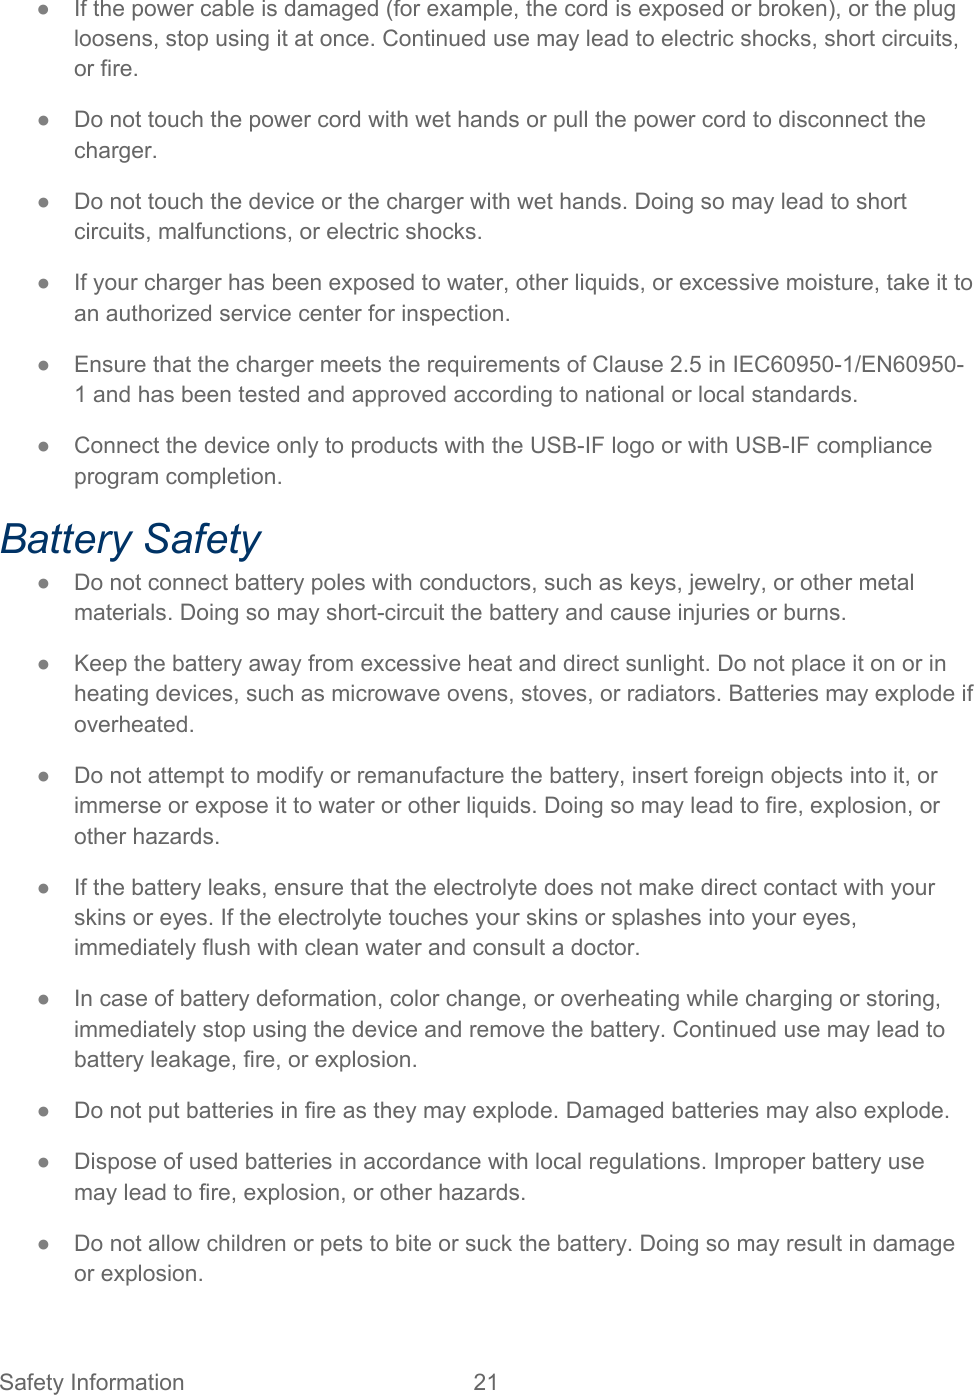 Safety Information 21   ● If the power cable is damaged (for example, the cord is exposed or broken), or the plug loosens, stop using it at once. Continued use may lead to electric shocks, short circuits, or fire. ● Do not touch the power cord with wet hands or pull the power cord to disconnect the charger. ● Do not touch the device or the charger with wet hands. Doing so may lead to short circuits, malfunctions, or electric shocks. ● If your charger has been exposed to water, other liquids, or excessive moisture, take it to an authorized service center for inspection. ● Ensure that the charger meets the requirements of Clause 2.5 in IEC60950-1/EN60950-1 and has been tested and approved according to national or local standards. ● Connect the device only to products with the USB-IF logo or with USB-IF compliance program completion. Battery Safety ● Do not connect battery poles with conductors, such as keys, jewelry, or other metal materials. Doing so may short-circuit the battery and cause injuries or burns. ● Keep the battery away from excessive heat and direct sunlight. Do not place it on or in heating devices, such as microwave ovens, stoves, or radiators. Batteries may explode if overheated. ● Do not attempt to modify or remanufacture the battery, insert foreign objects into it, or immerse or expose it to water or other liquids. Doing so may lead to fire, explosion, or other hazards. ● If the battery leaks, ensure that the electrolyte does not make direct contact with your skins or eyes. If the electrolyte touches your skins or splashes into your eyes, immediately flush with clean water and consult a doctor. ● In case of battery deformation, color change, or overheating while charging or storing, immediately stop using the device and remove the battery. Continued use may lead to battery leakage, fire, or explosion. ● Do not put batteries in fire as they may explode. Damaged batteries may also explode. ● Dispose of used batteries in accordance with local regulations. Improper battery use may lead to fire, explosion, or other hazards. ● Do not allow children or pets to bite or suck the battery. Doing so may result in damage or explosion. 